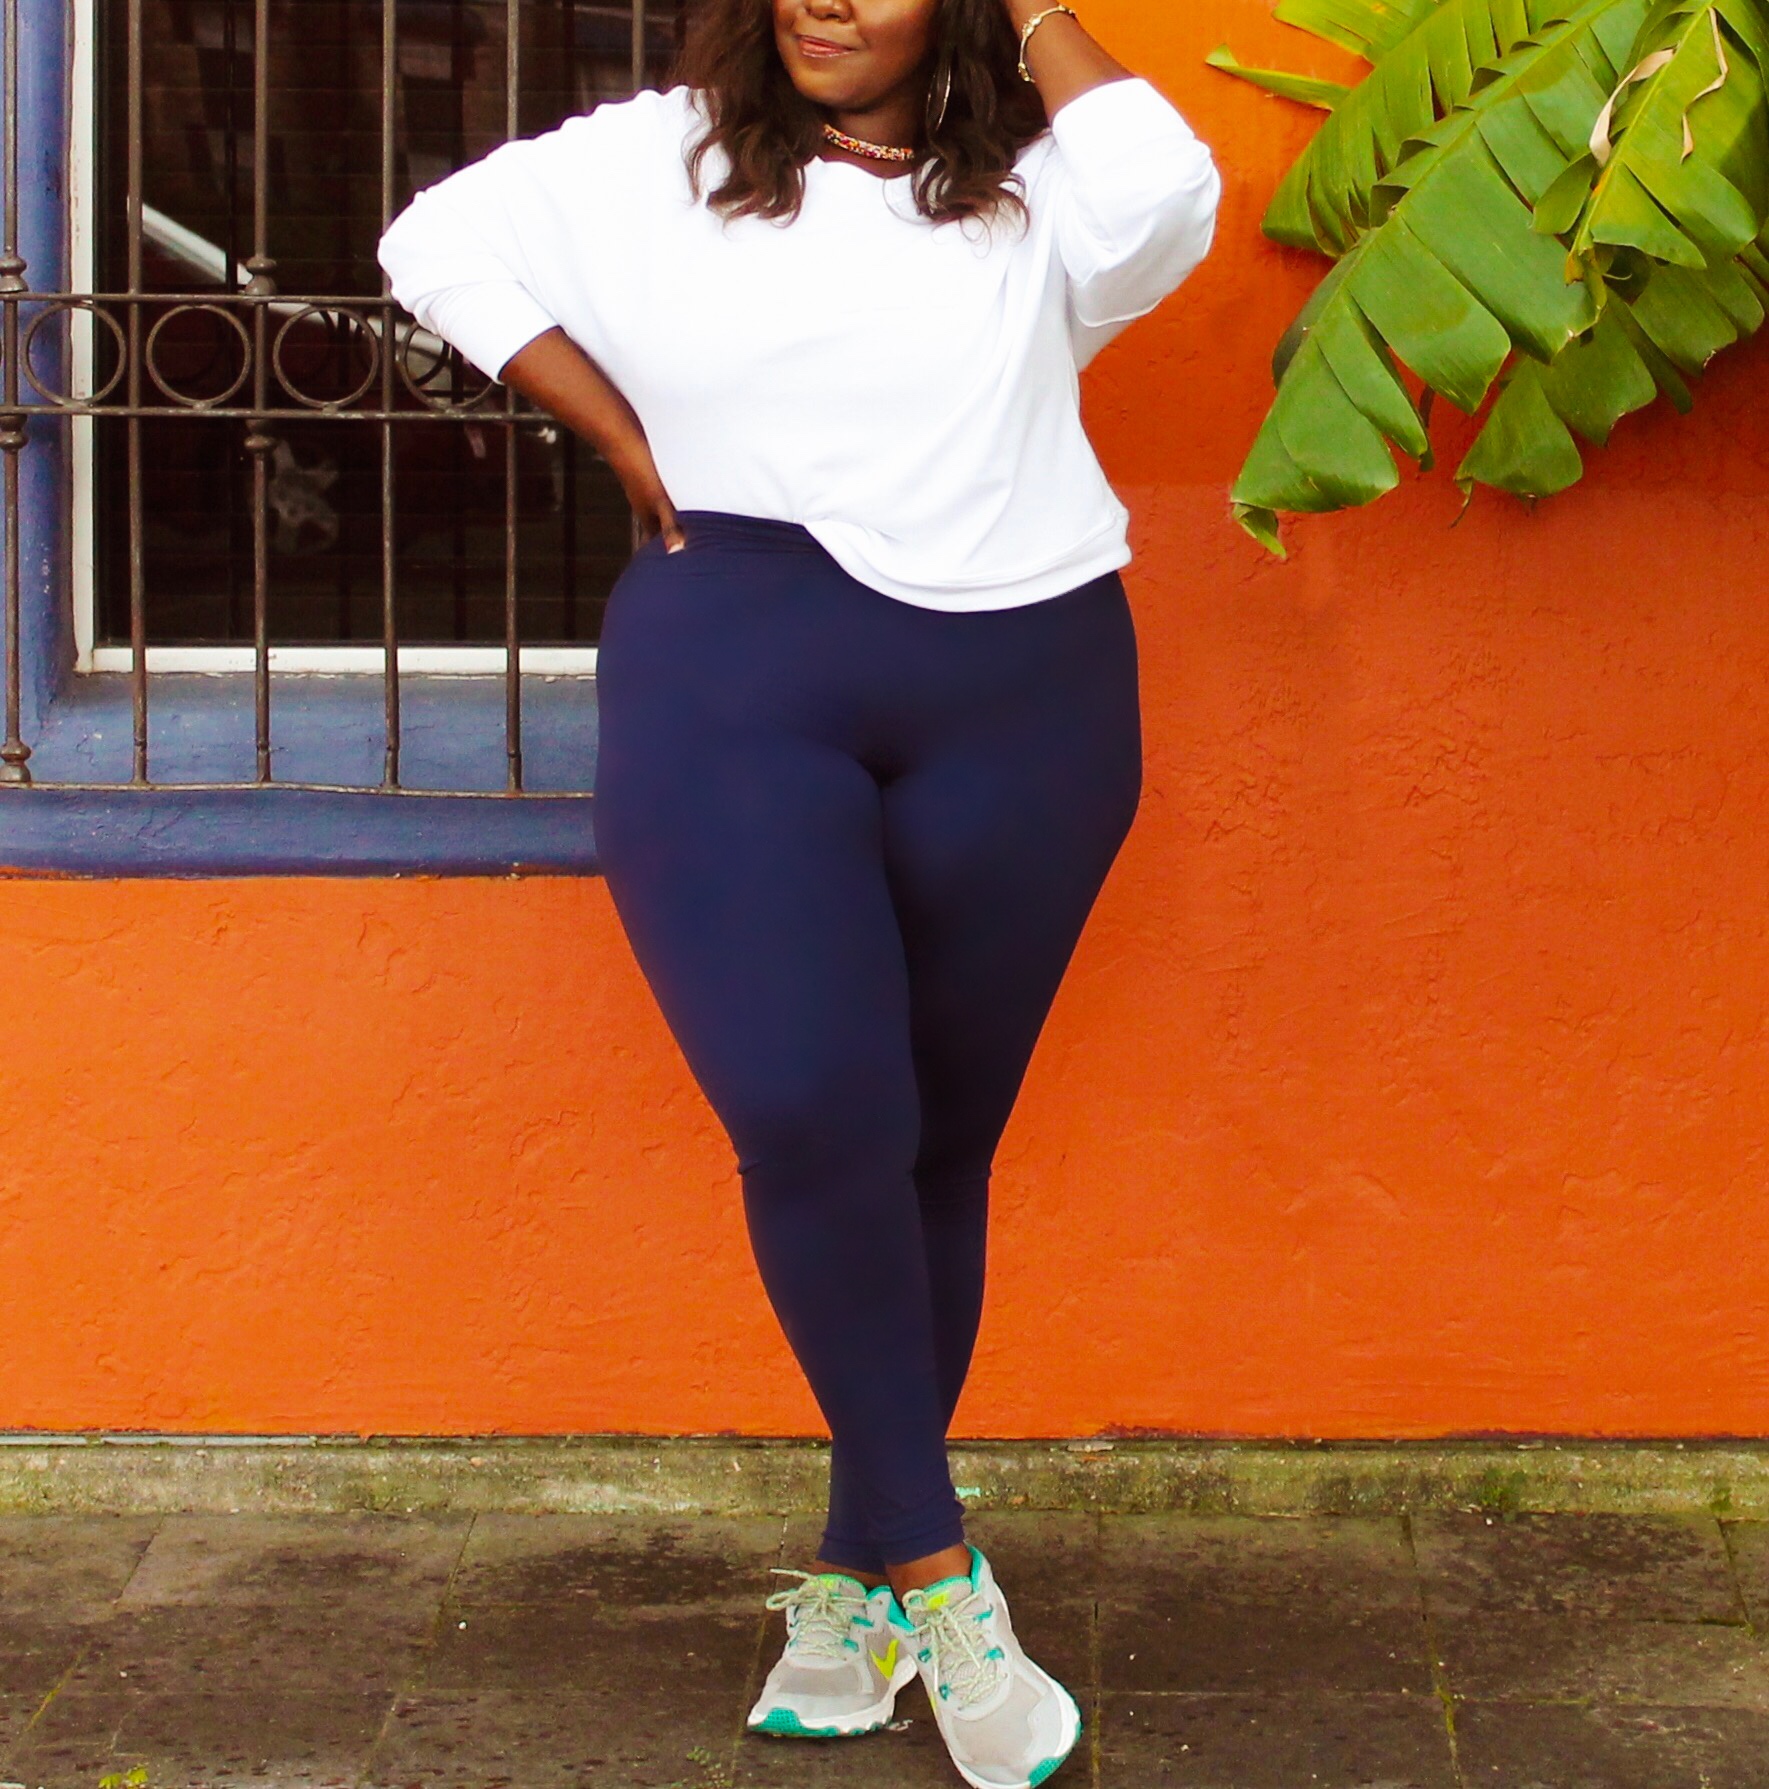 fabletics active, fabletics review plus size, move in fabletics, athleisure nike puma plus size fashion blogs 2019, beautiful curvy girls, beautiful plus size dark skin girls, plus size black bloggers, clothes for curvy girls, curvy girl fashion clothing, plus blog, plus size fashion tips, plus size women blog, curvy women fashion, plus blog, curvy girl fashion blog, style plus curves, plus size fashion instagram, curvy girl blog, bbw blog, plus size street fashion, plus size beauty blog, plus size fashion ideas, curvy girl summer outfits, plus size fashion magazine, plus fashion bloggers, zara